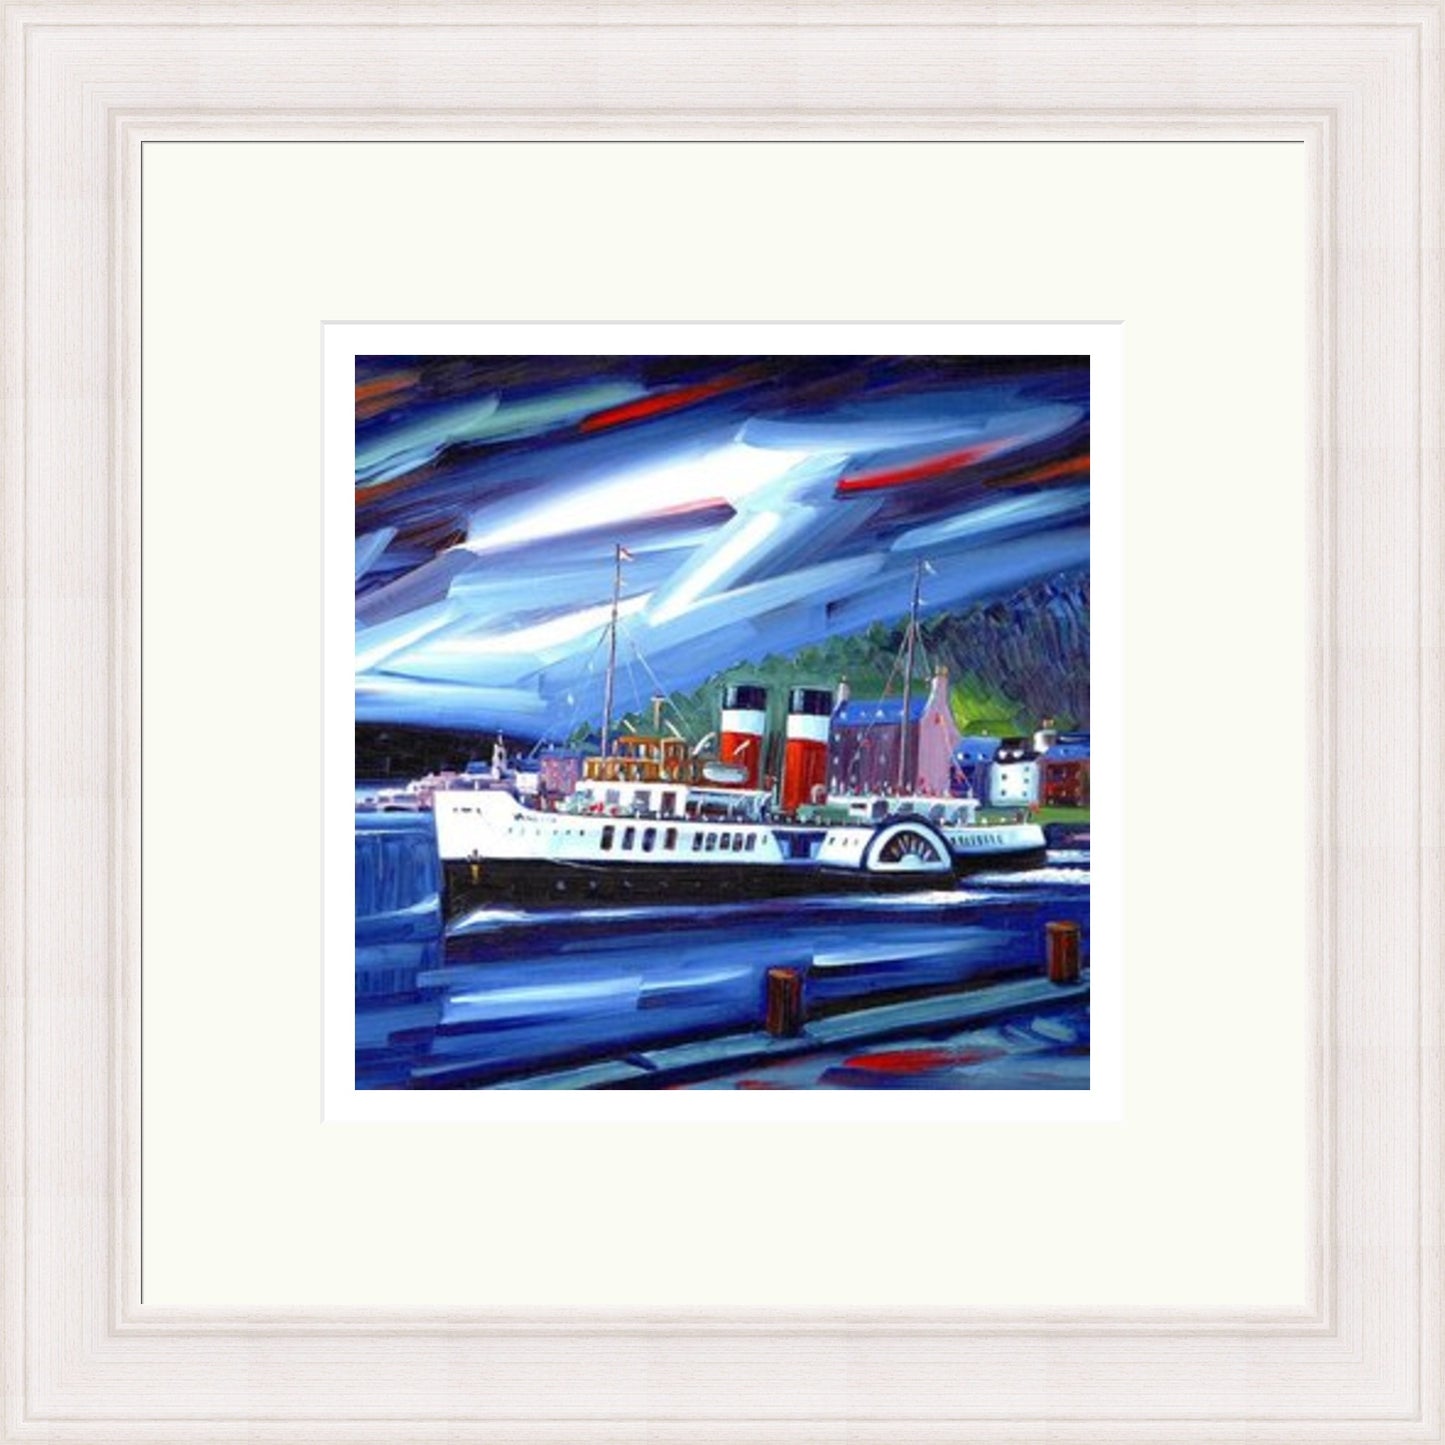 The Last Sea Going Paddle Steamer by Raymond Murray